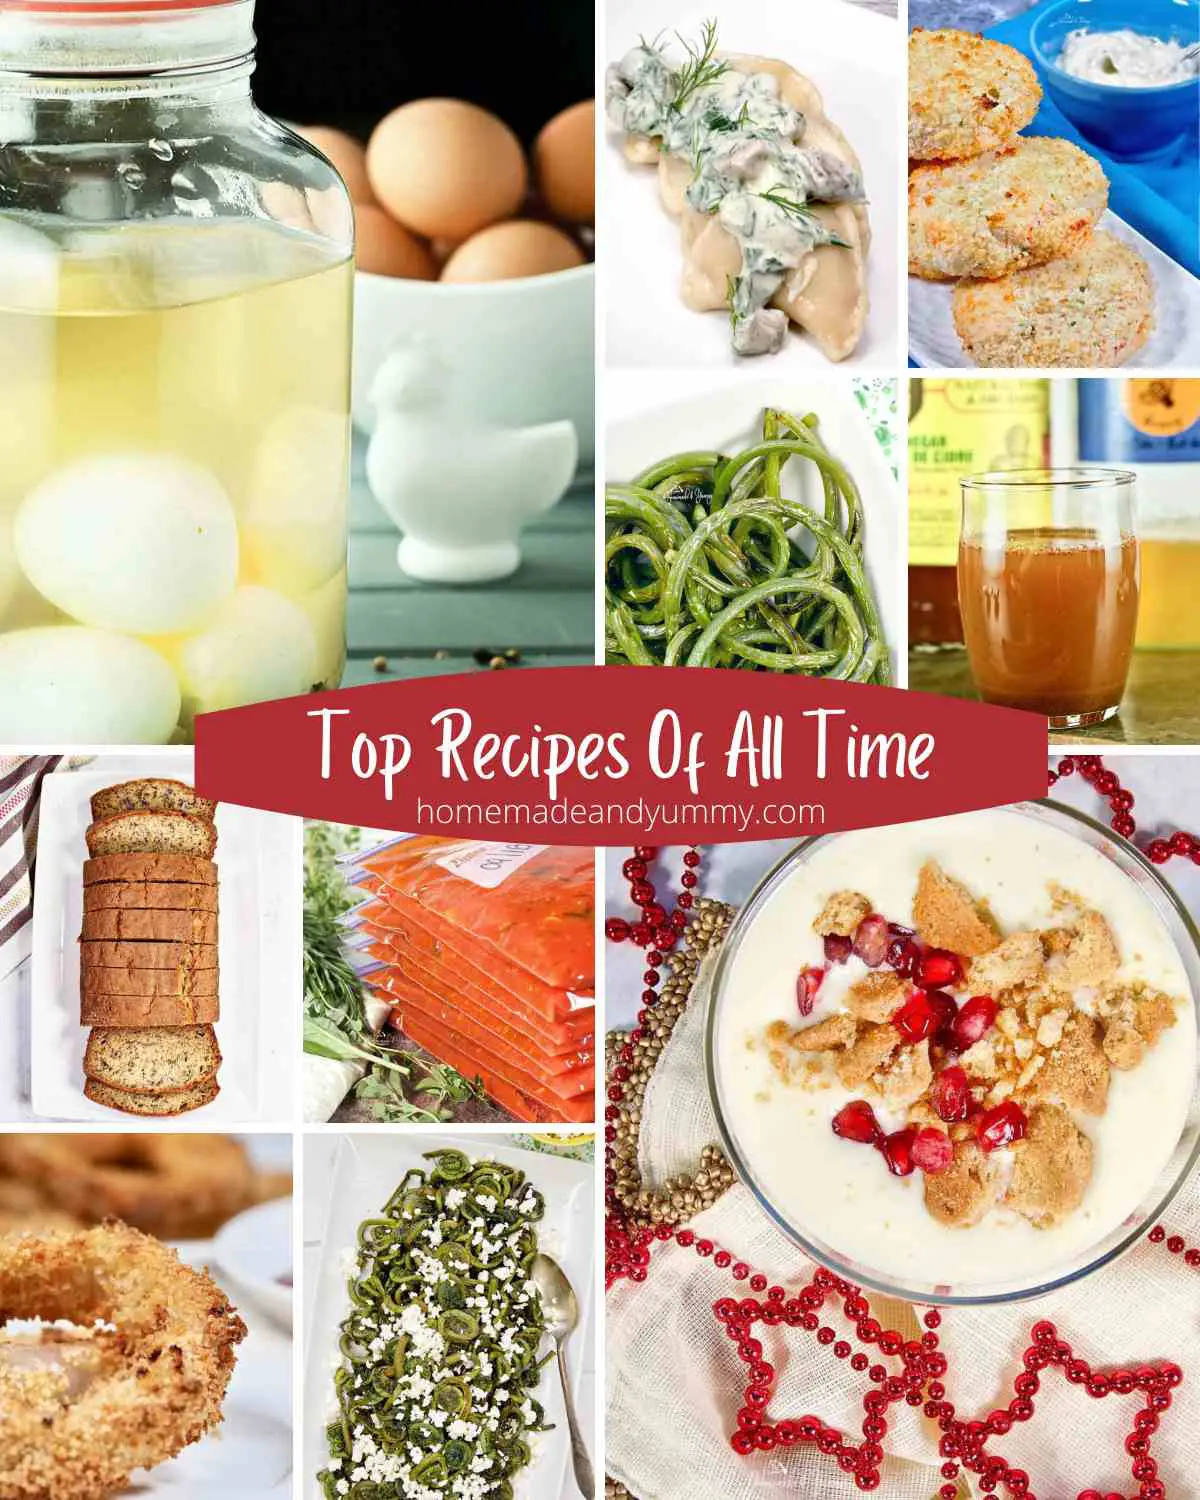 Top Recipes Of All Time